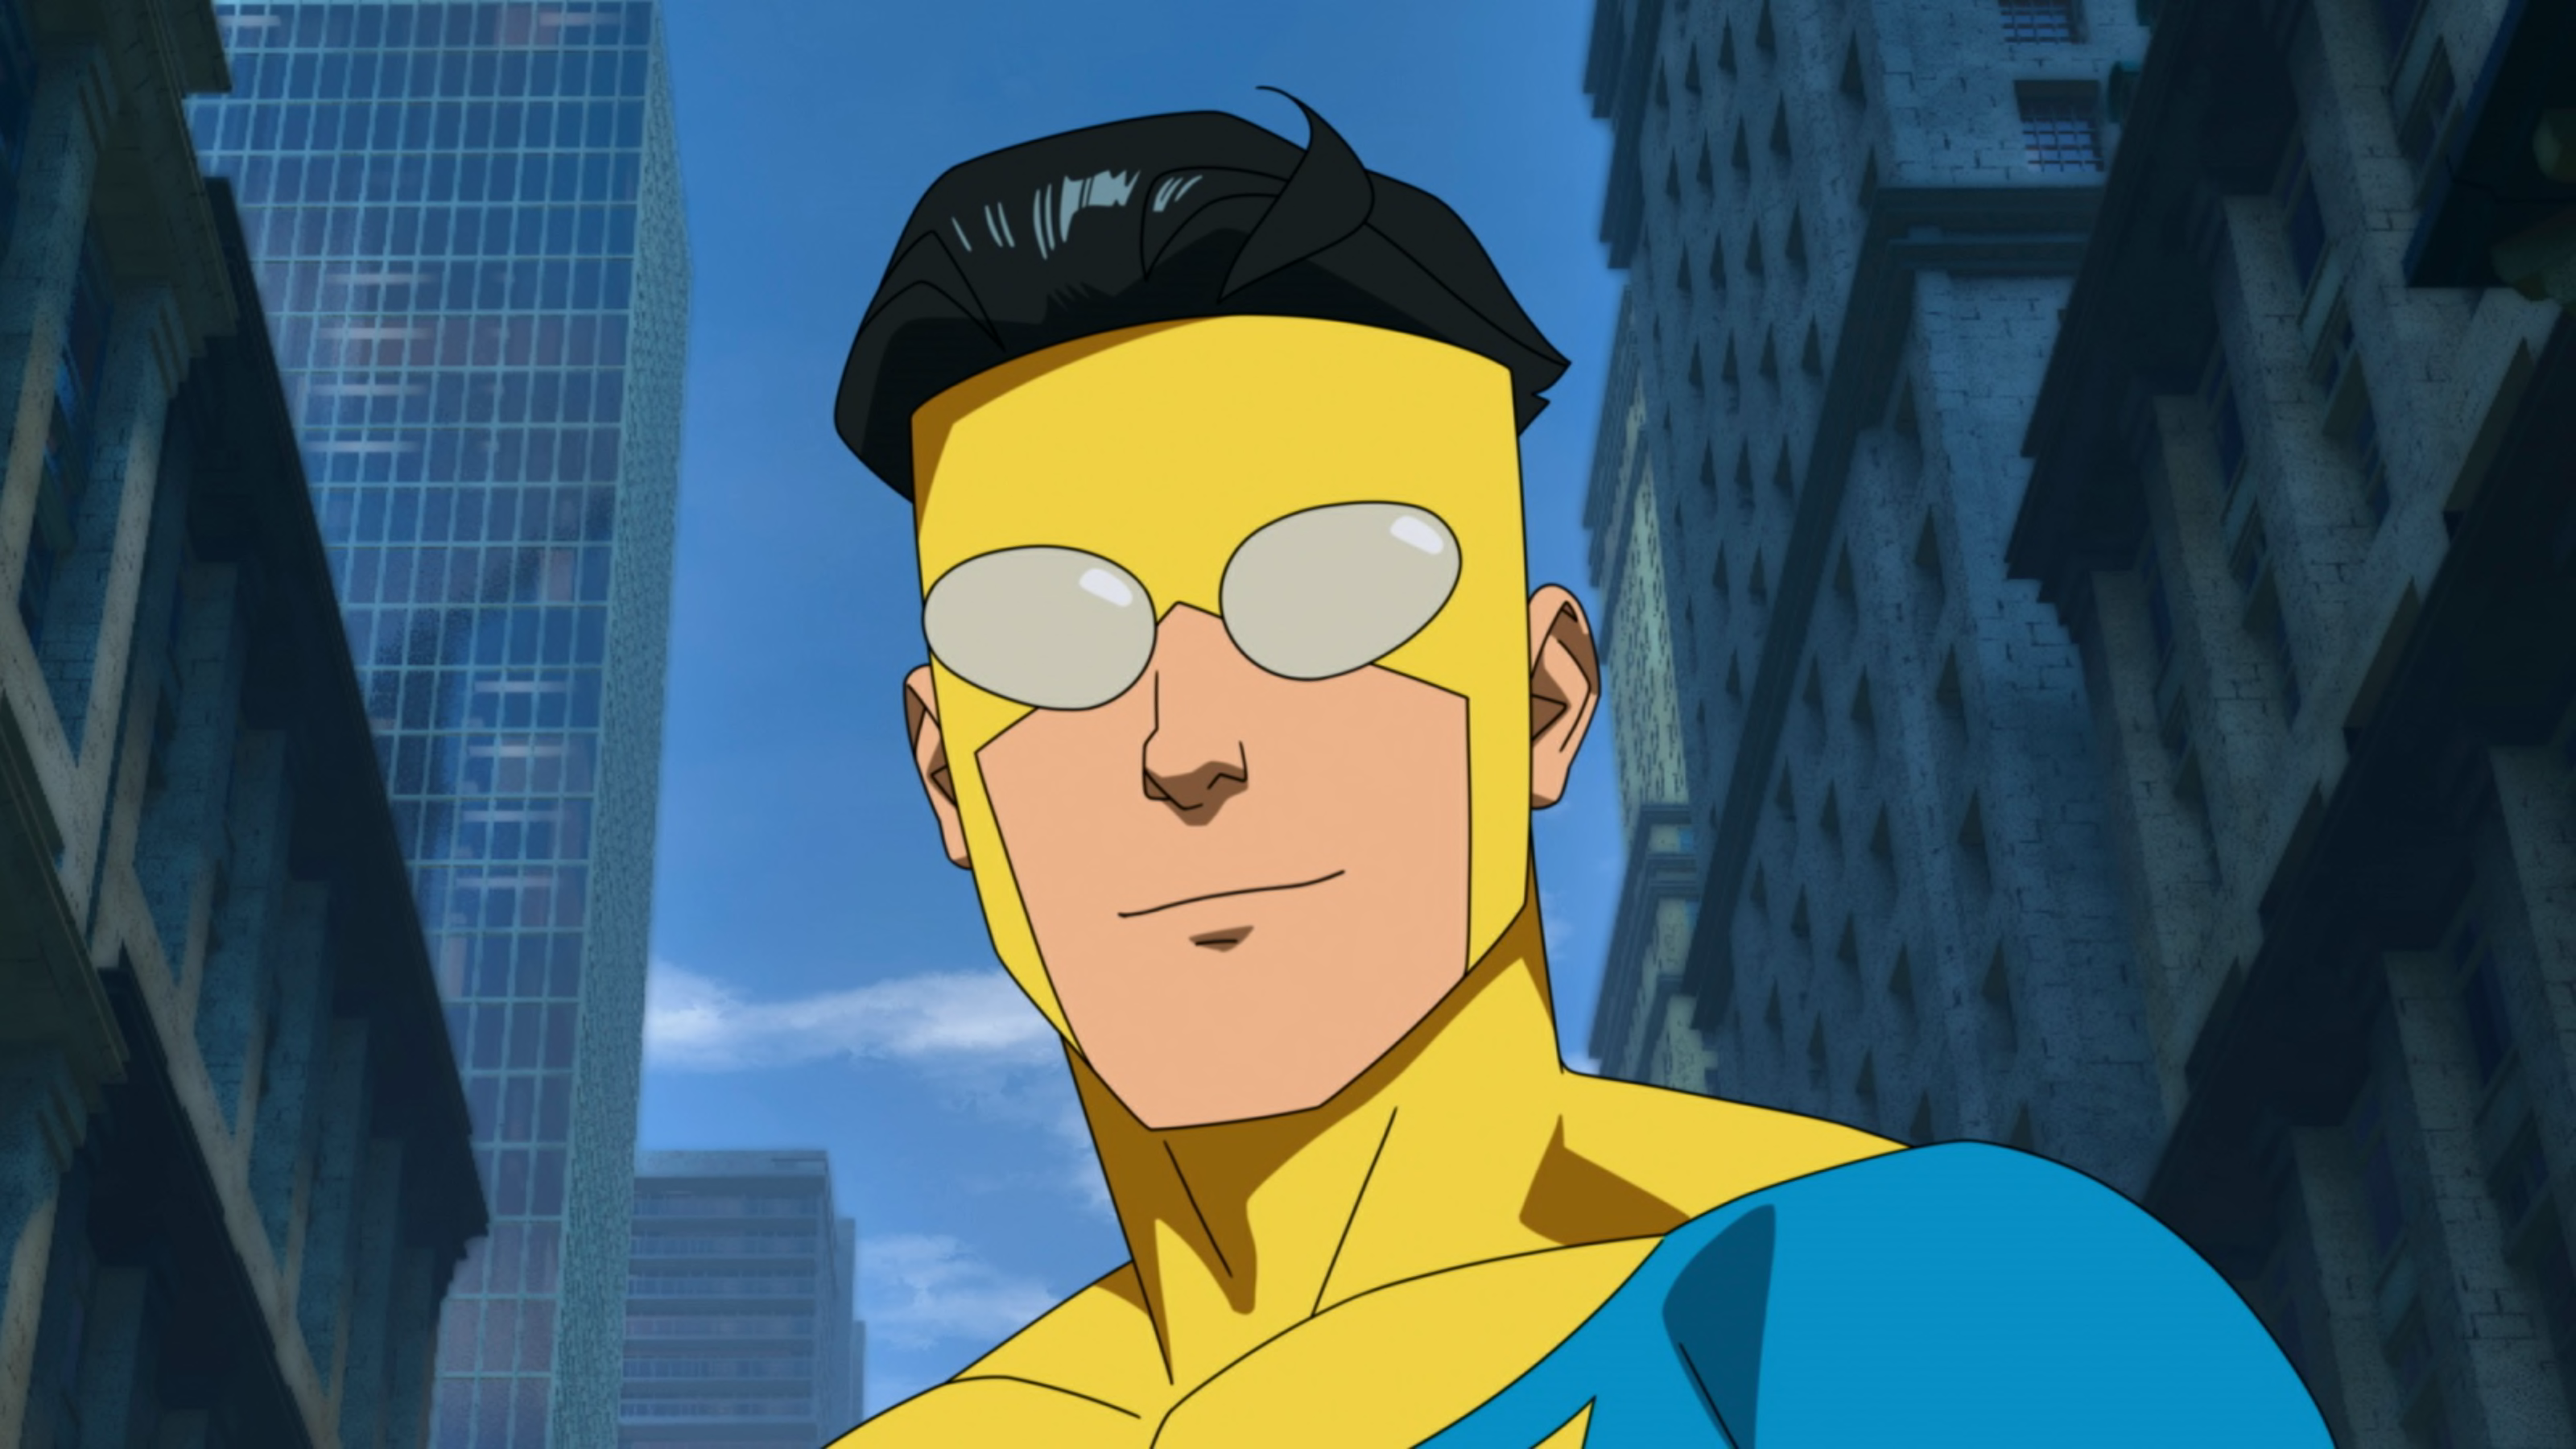 Invincible, Invincible season 2, Invincible season 2 release date, When is Invincible season 2 coming out?, Is season 2 of Invincible happening?